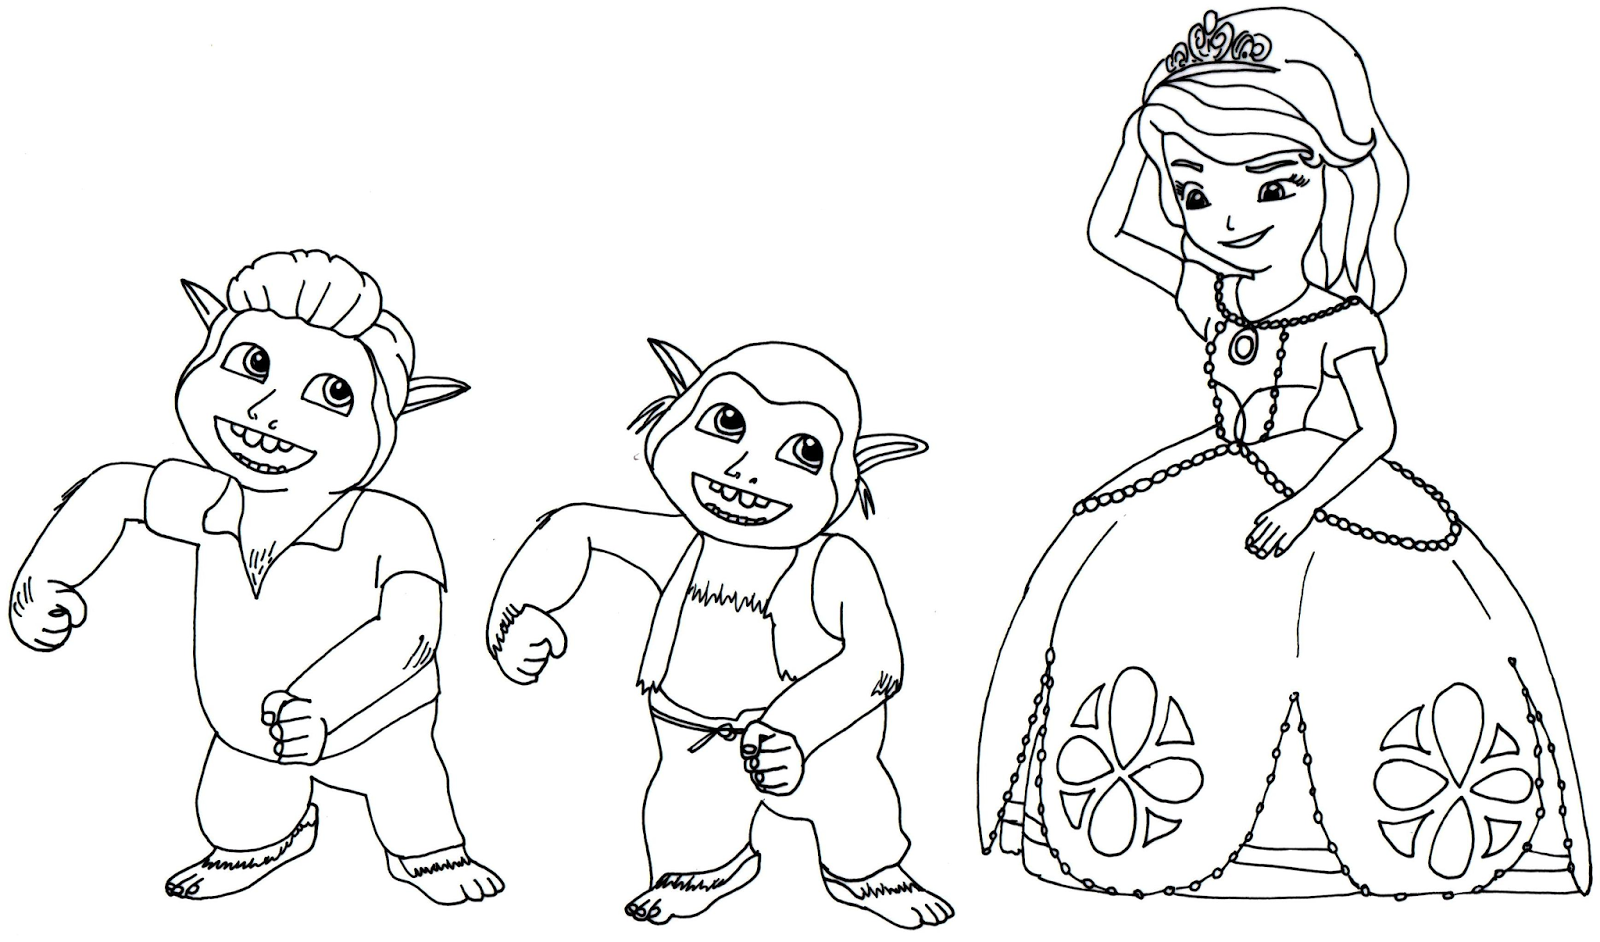 Sofia The First Coloring Pages: Sofia the First Coloring Page with ...